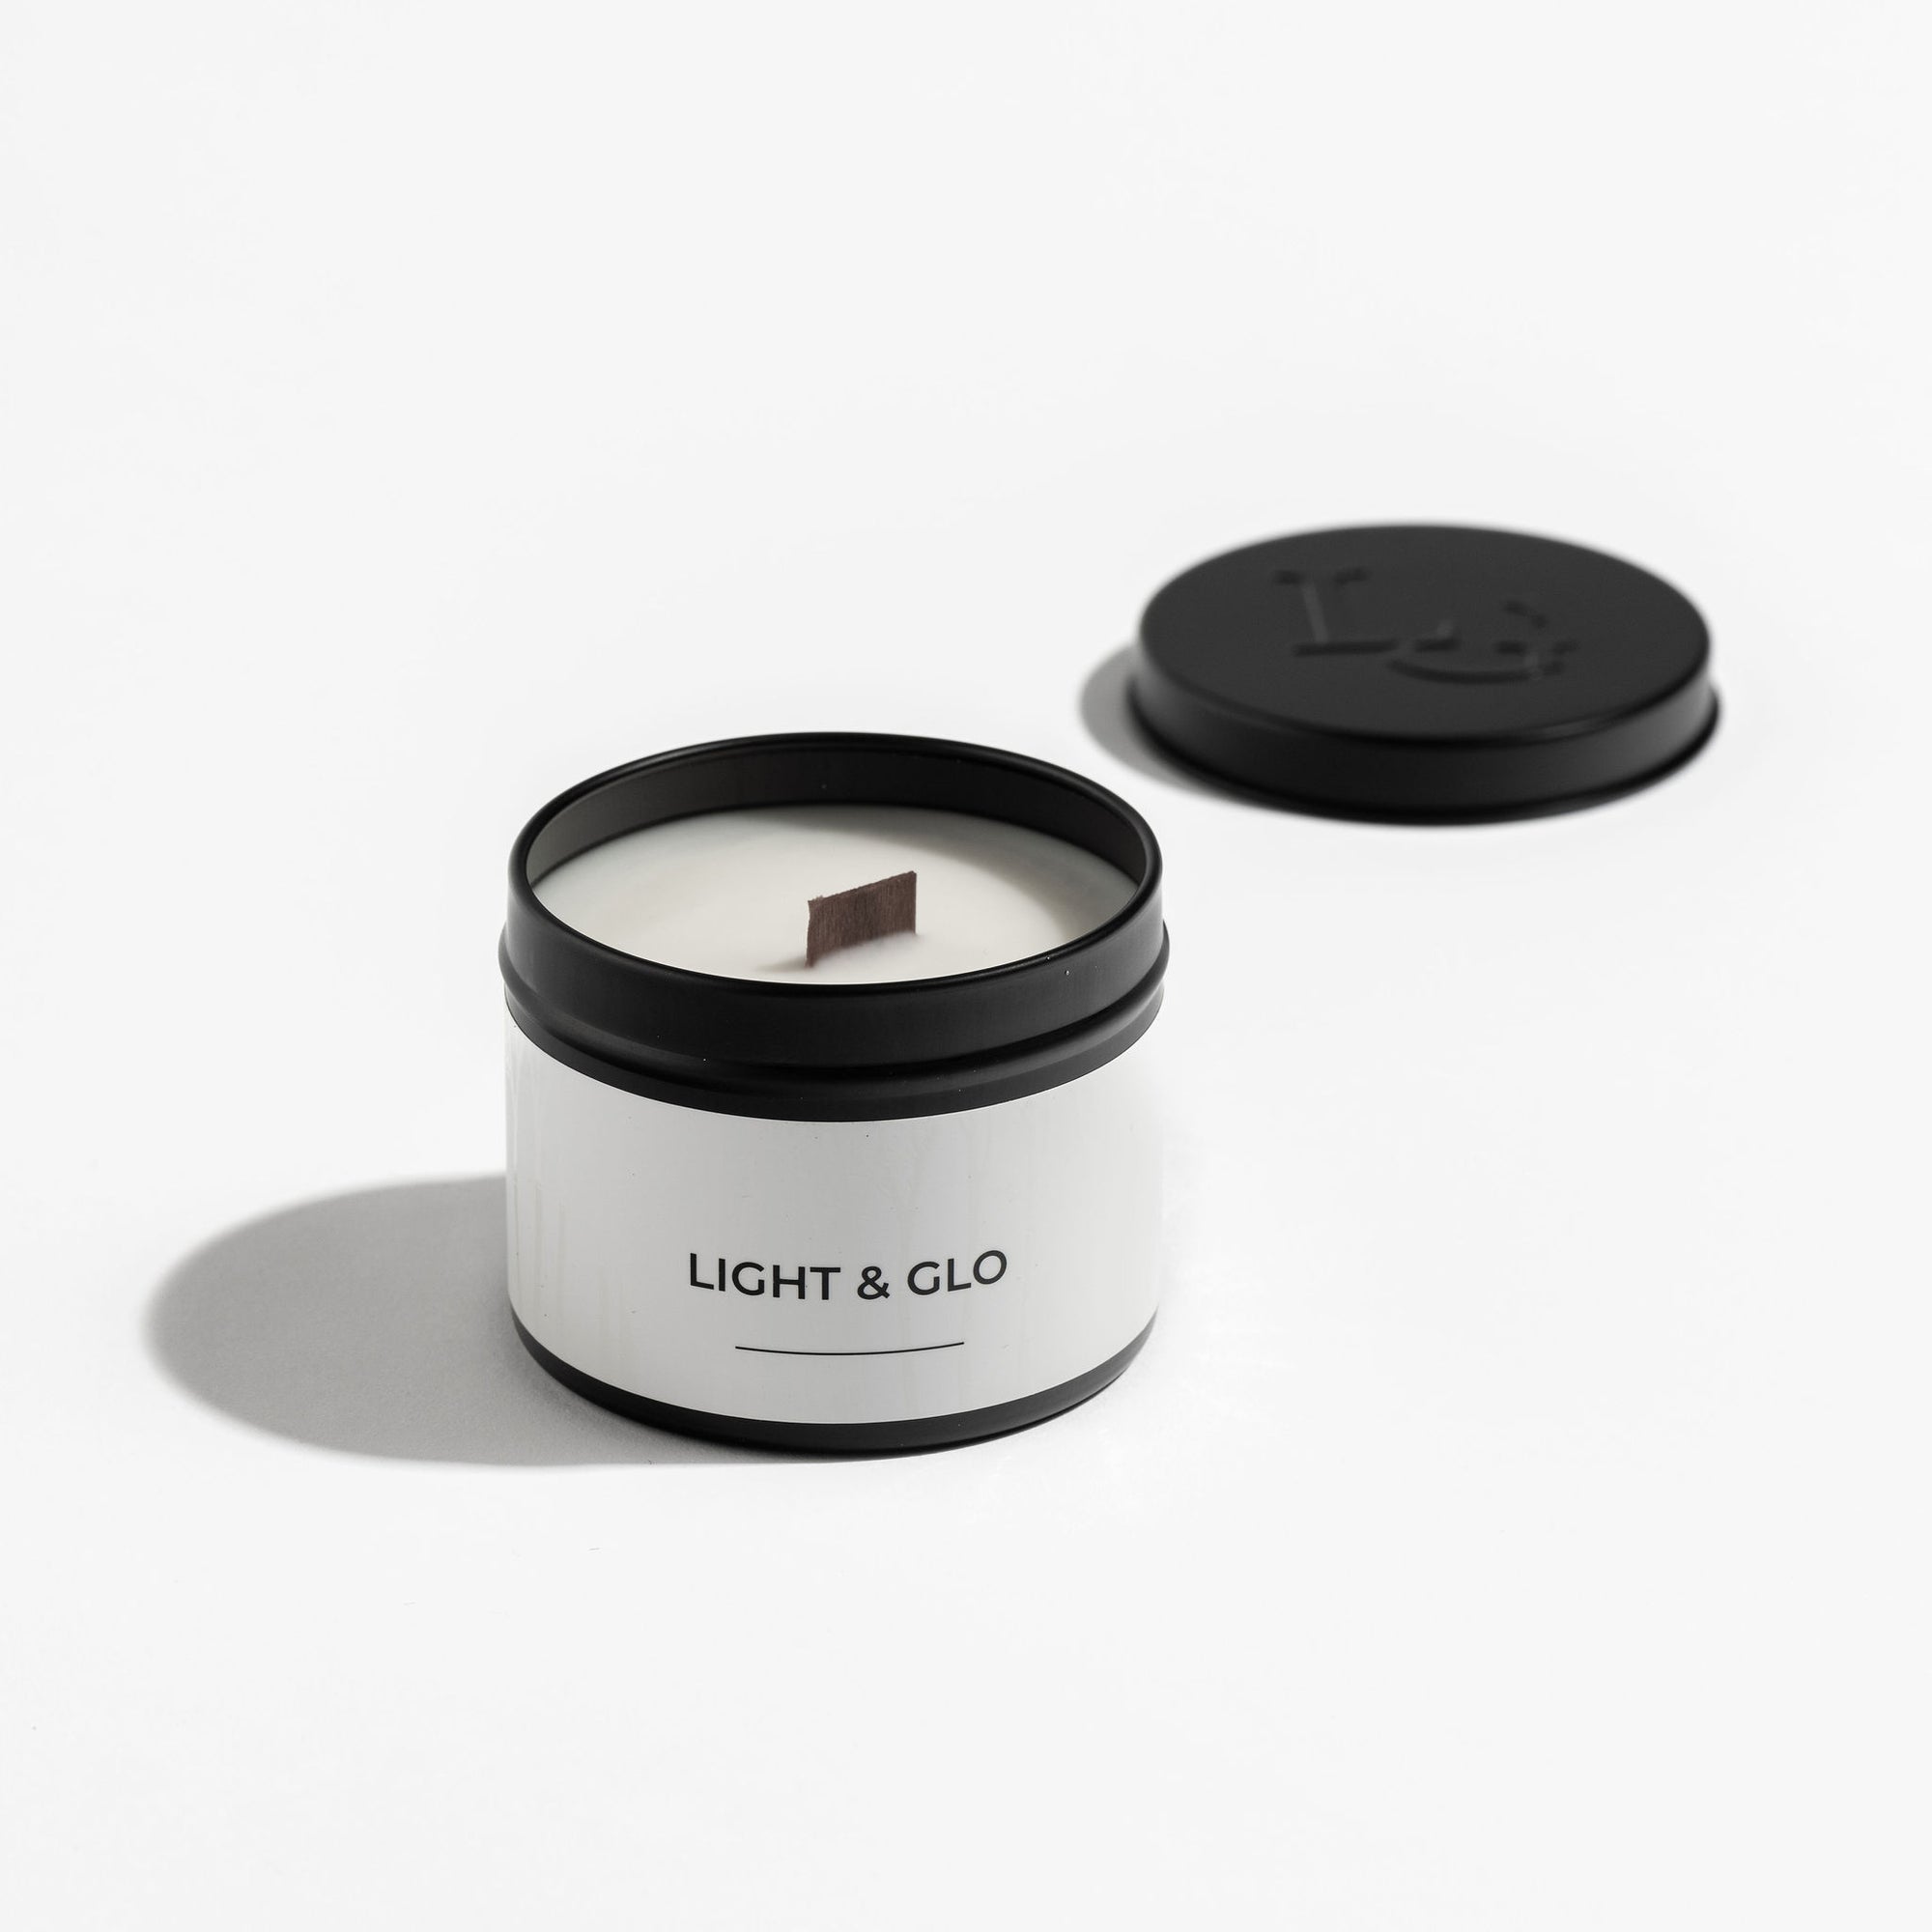 Neroli & Ylang Ylang - Monochrome Travel Candle | Luxury Candles & Home Fragrances by Light + Glo